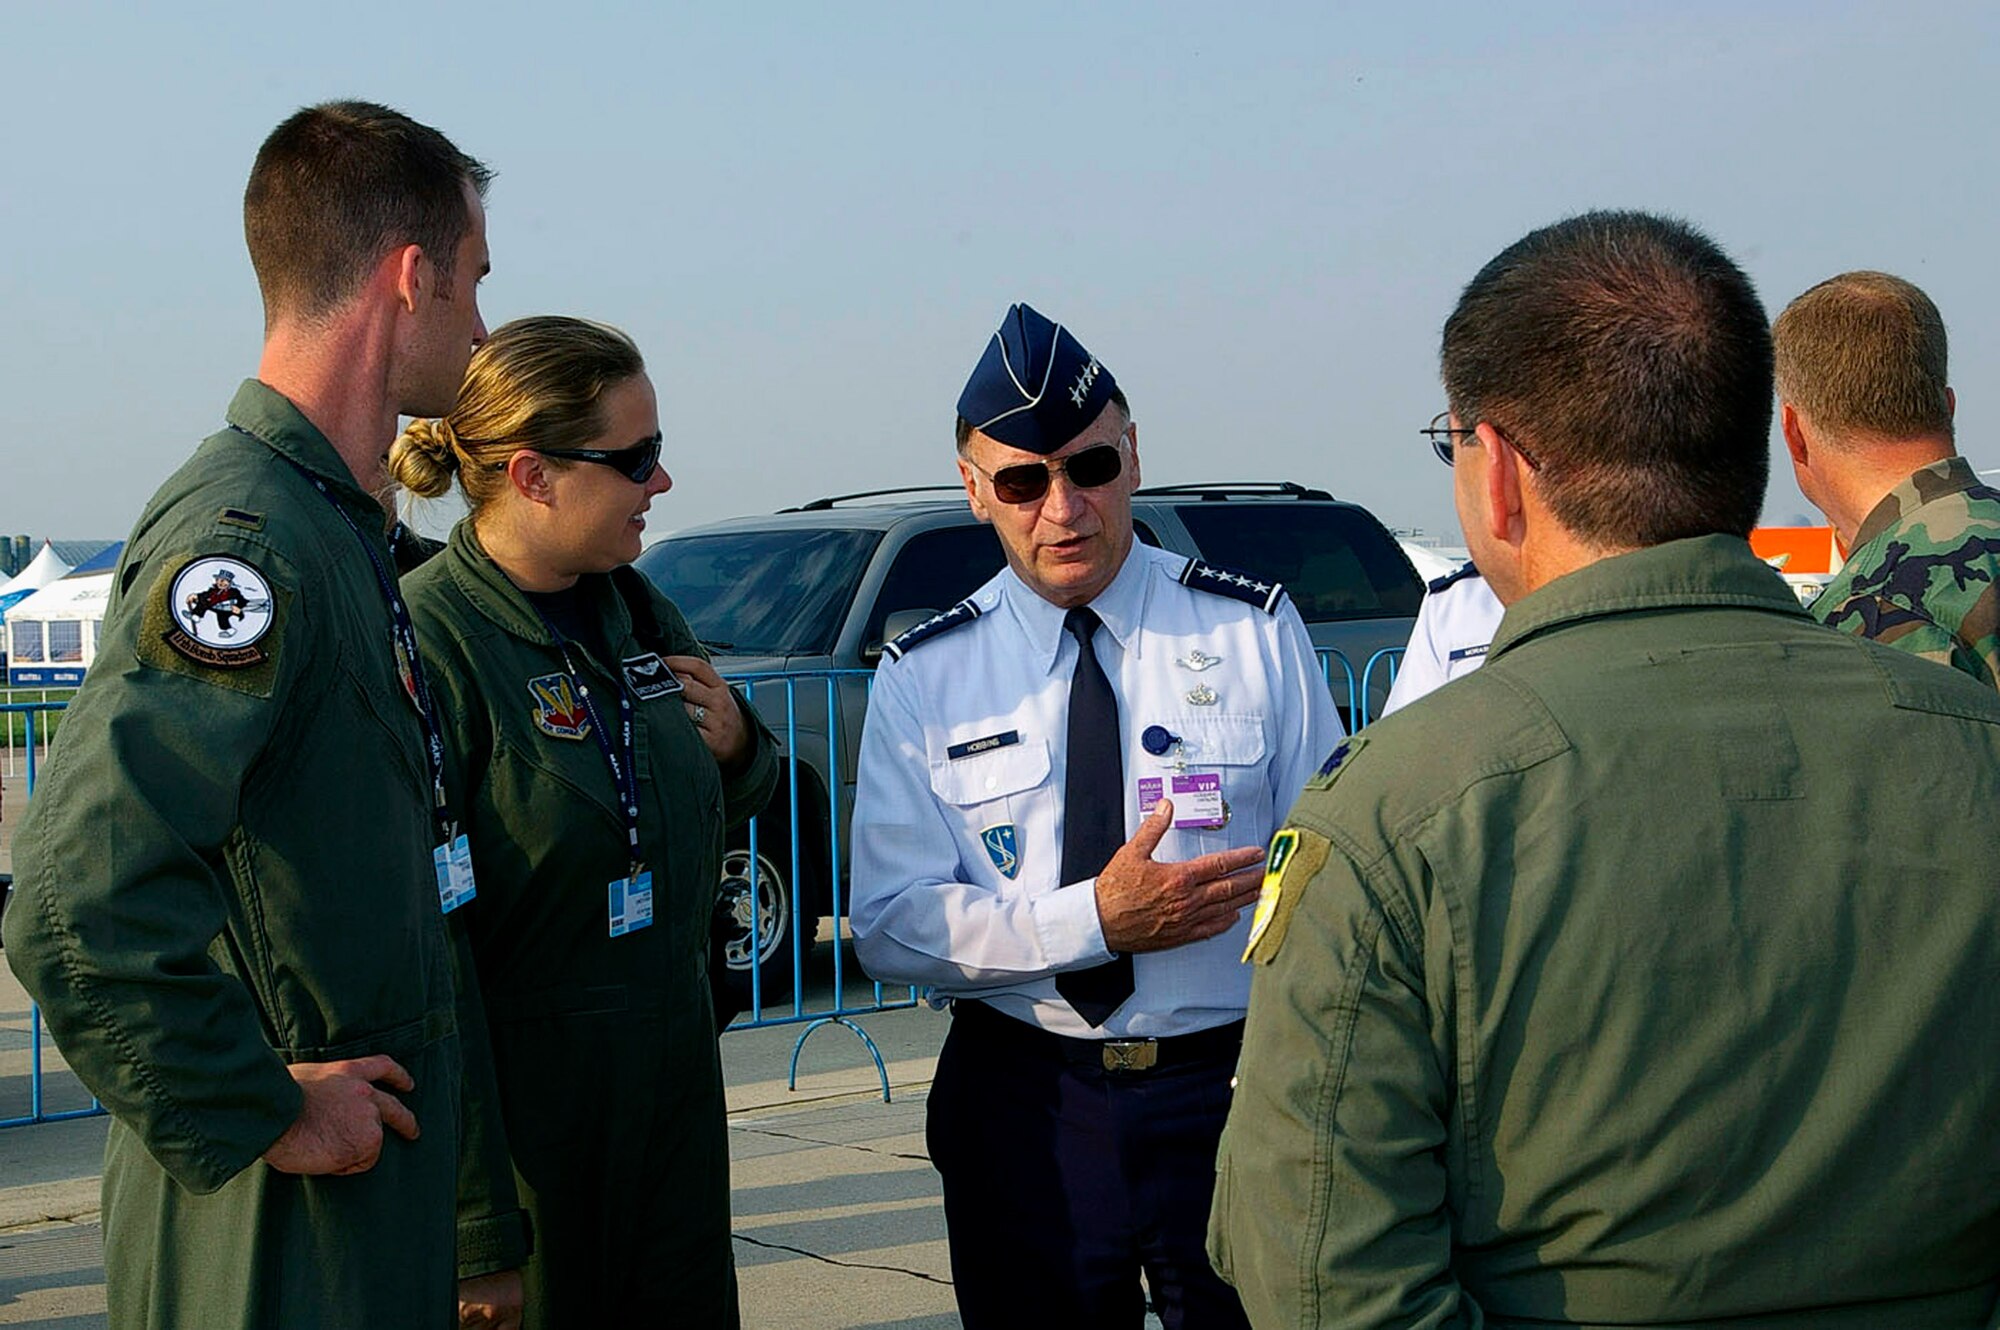 1st Lt. Mike Middents (from left), Capt. Gretchen Dues and Lt. Col. Jeff Marcotte (far right) talk with Gen. William T. Hobbins during the opening day of the Moscow International Air Show Aug. 21 at Ramenskoye Airfield in Zhukovsky, Russia. The air show runs through Aug. 26 and includes Department of Defense participation of static displays and aerial flight demonstrations. General Hobbins is commander of U.S. Air Forces in Europe. The Airmen are from the 2nd Bomb Wing at Barksdale Air Force Base, La. (U.S. Air Force photo/Karen Abeyasekere)
